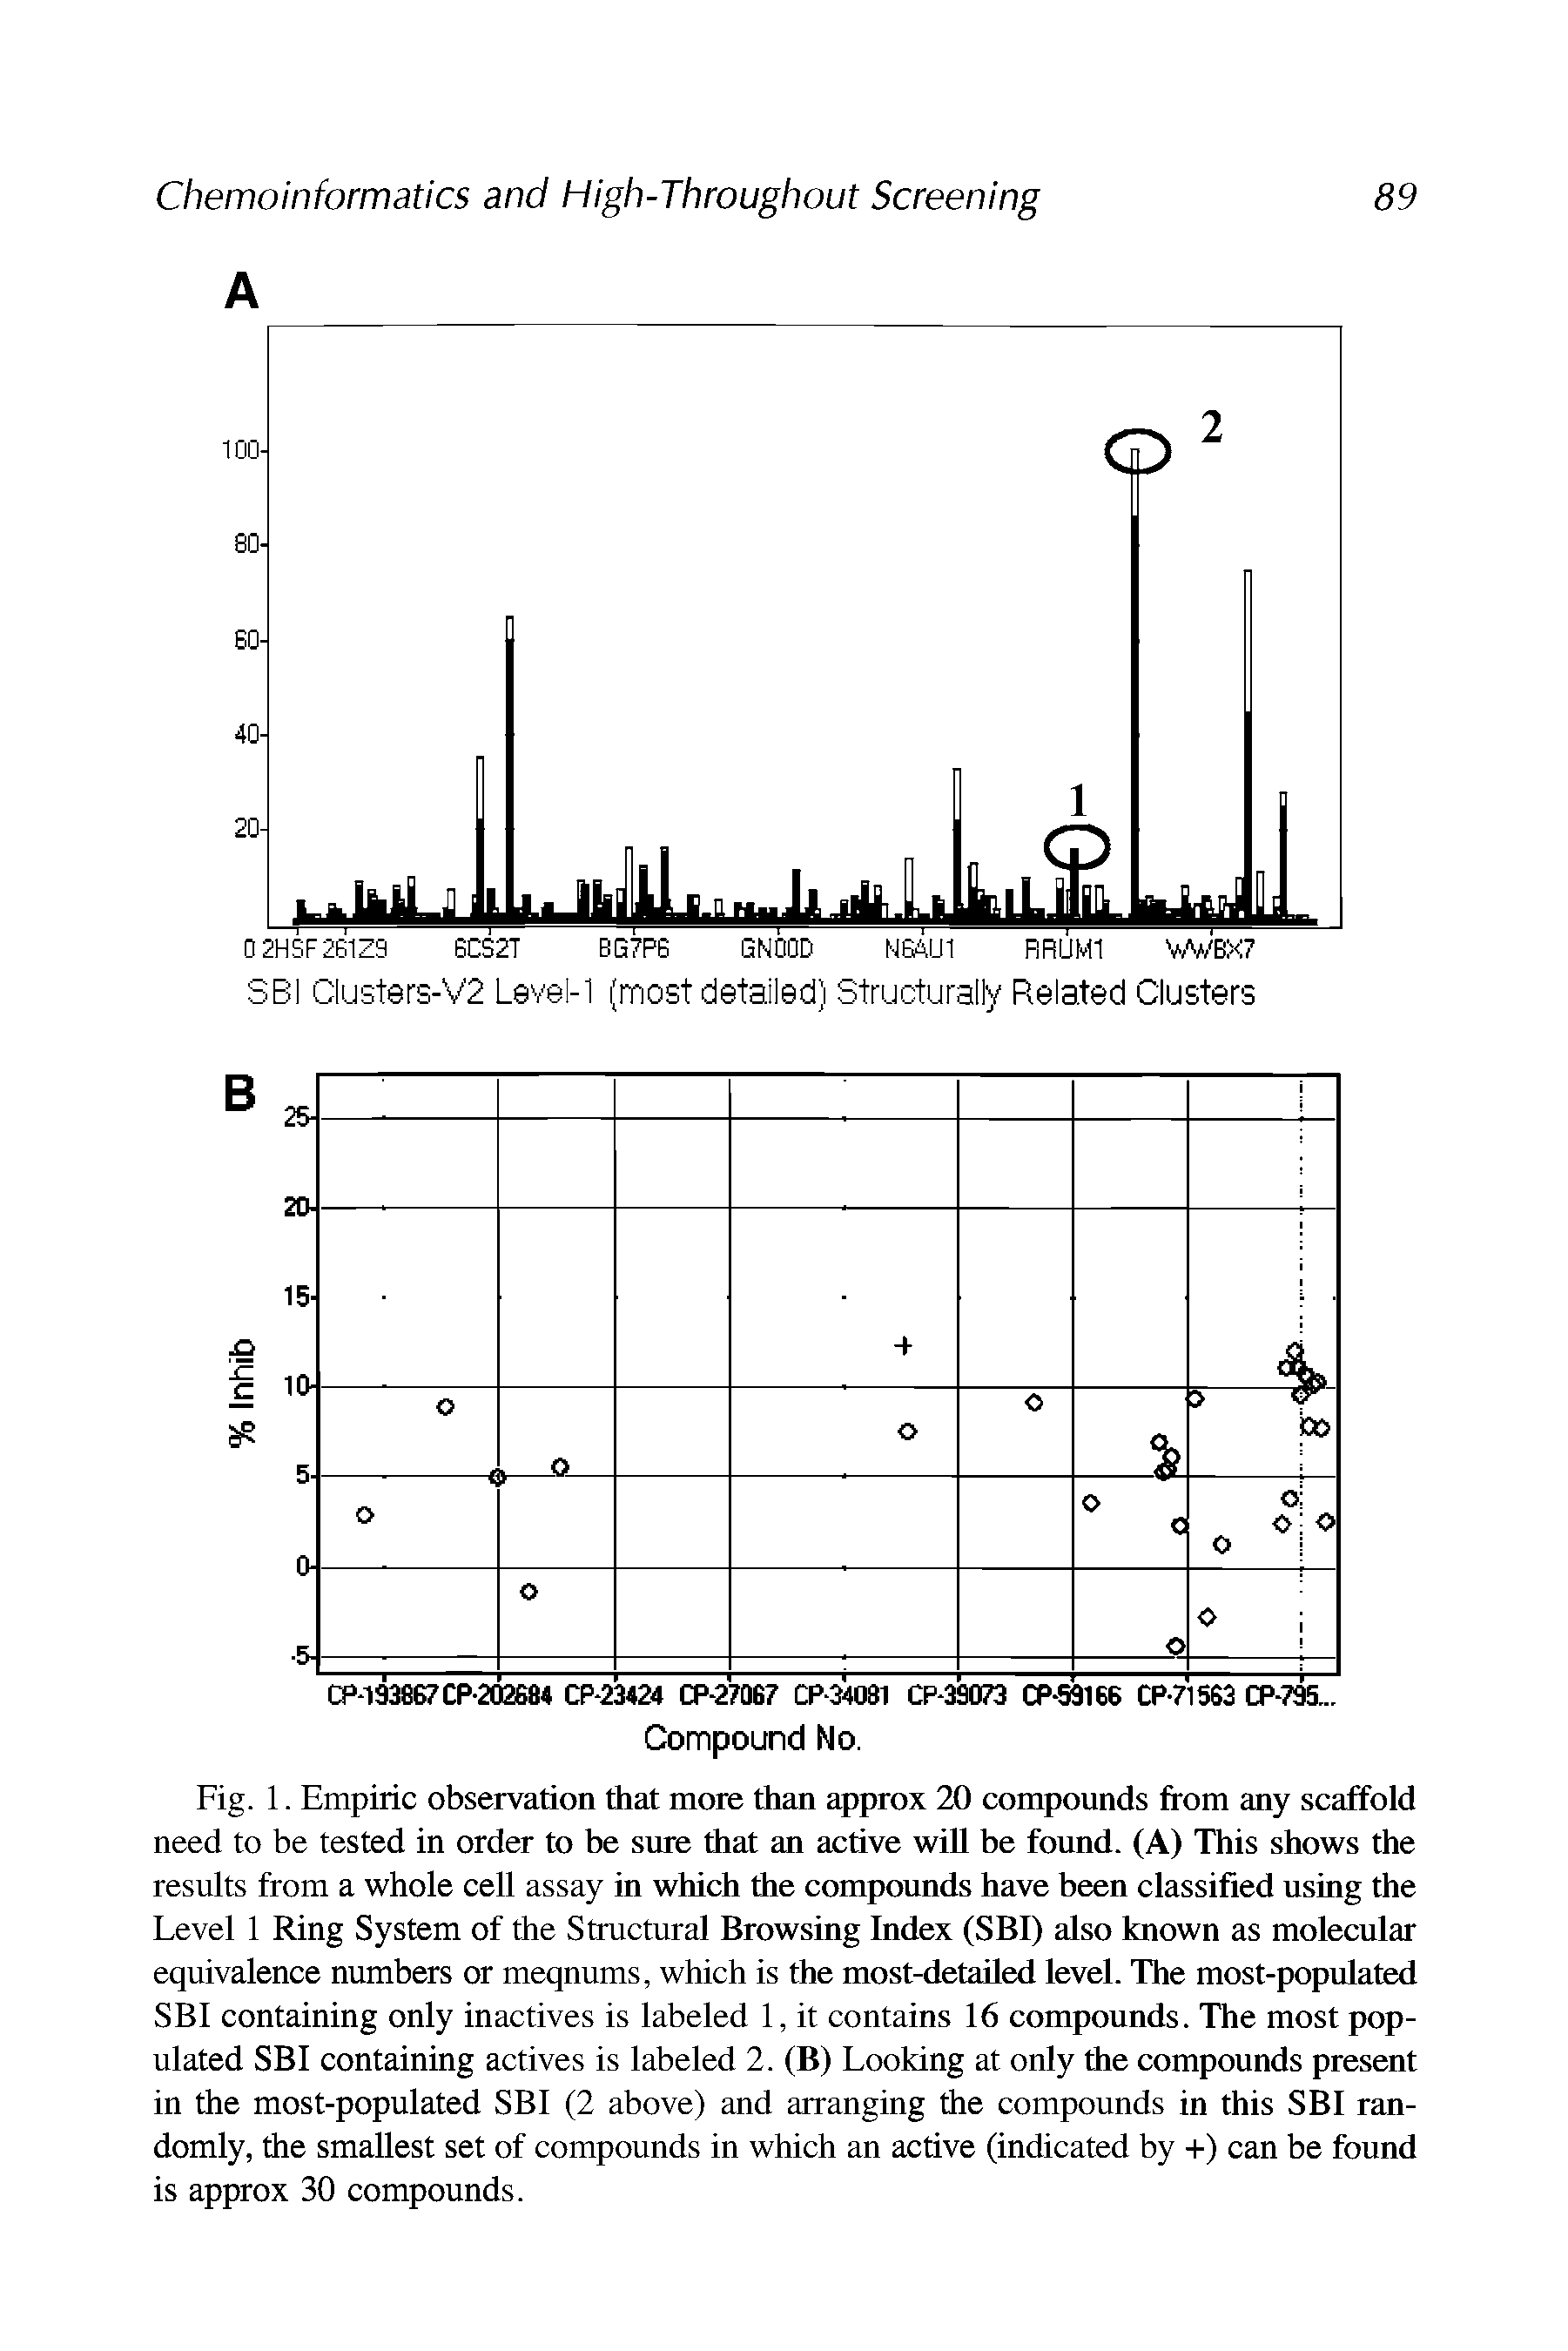 Fig. 1. Empiric observation that more than approx 20 compounds from any scaffold need to be tested in order to be sure that an active will be found. (A) This shows the results from a whole cell assay in which the compounds have been classified using the Level 1 Ring System of the Structural Browsing Index (SBI) also known as molecular equivalence numbers or meqnums, which is the most-detailed level. The most-populated SBI containing only inactives is labeled 1, it contains 16 compounds. The most populated SBI containing actives is labeled 2. (B) Looking at only the compounds present in the most-populated SBI (2 above) and arranging the compounds in this SBI randomly, the smallest set of compounds in which an active (indicated by +) can be found is approx 30 compounds.